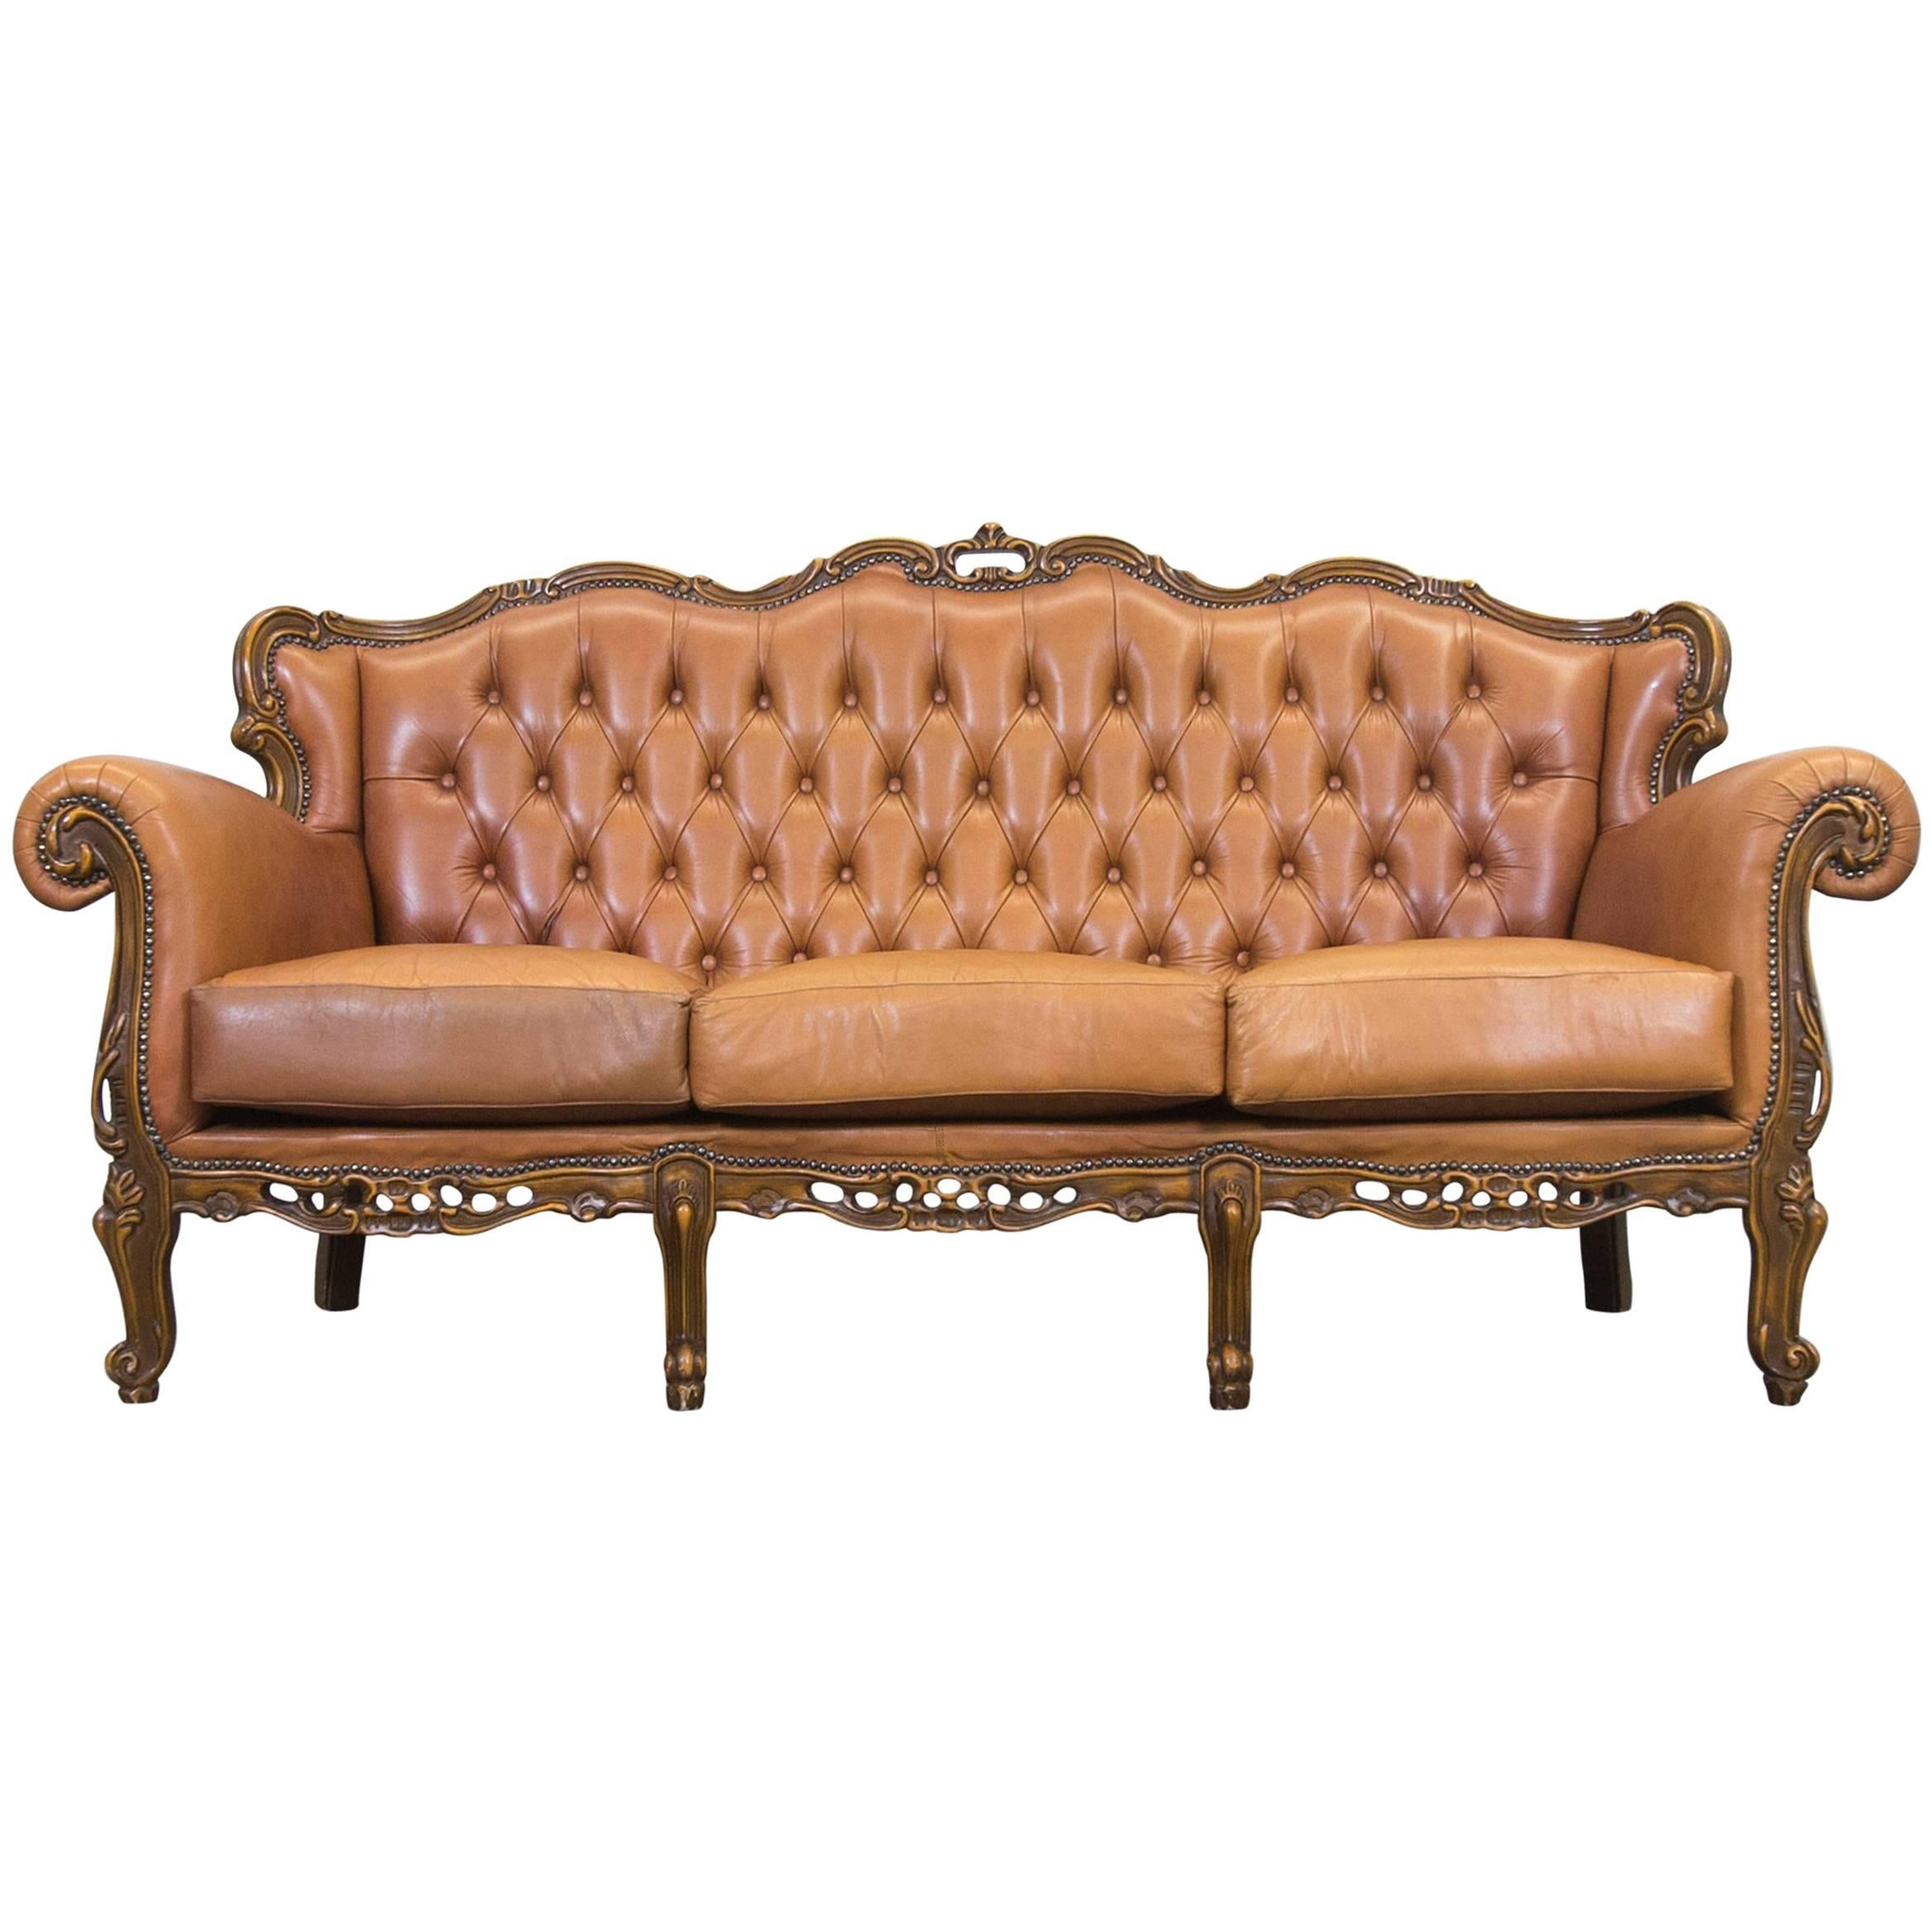 Chesterfield Baroque Leather Sofa Cognac Brown Three-Seat Wood Retro Vintage For Sale